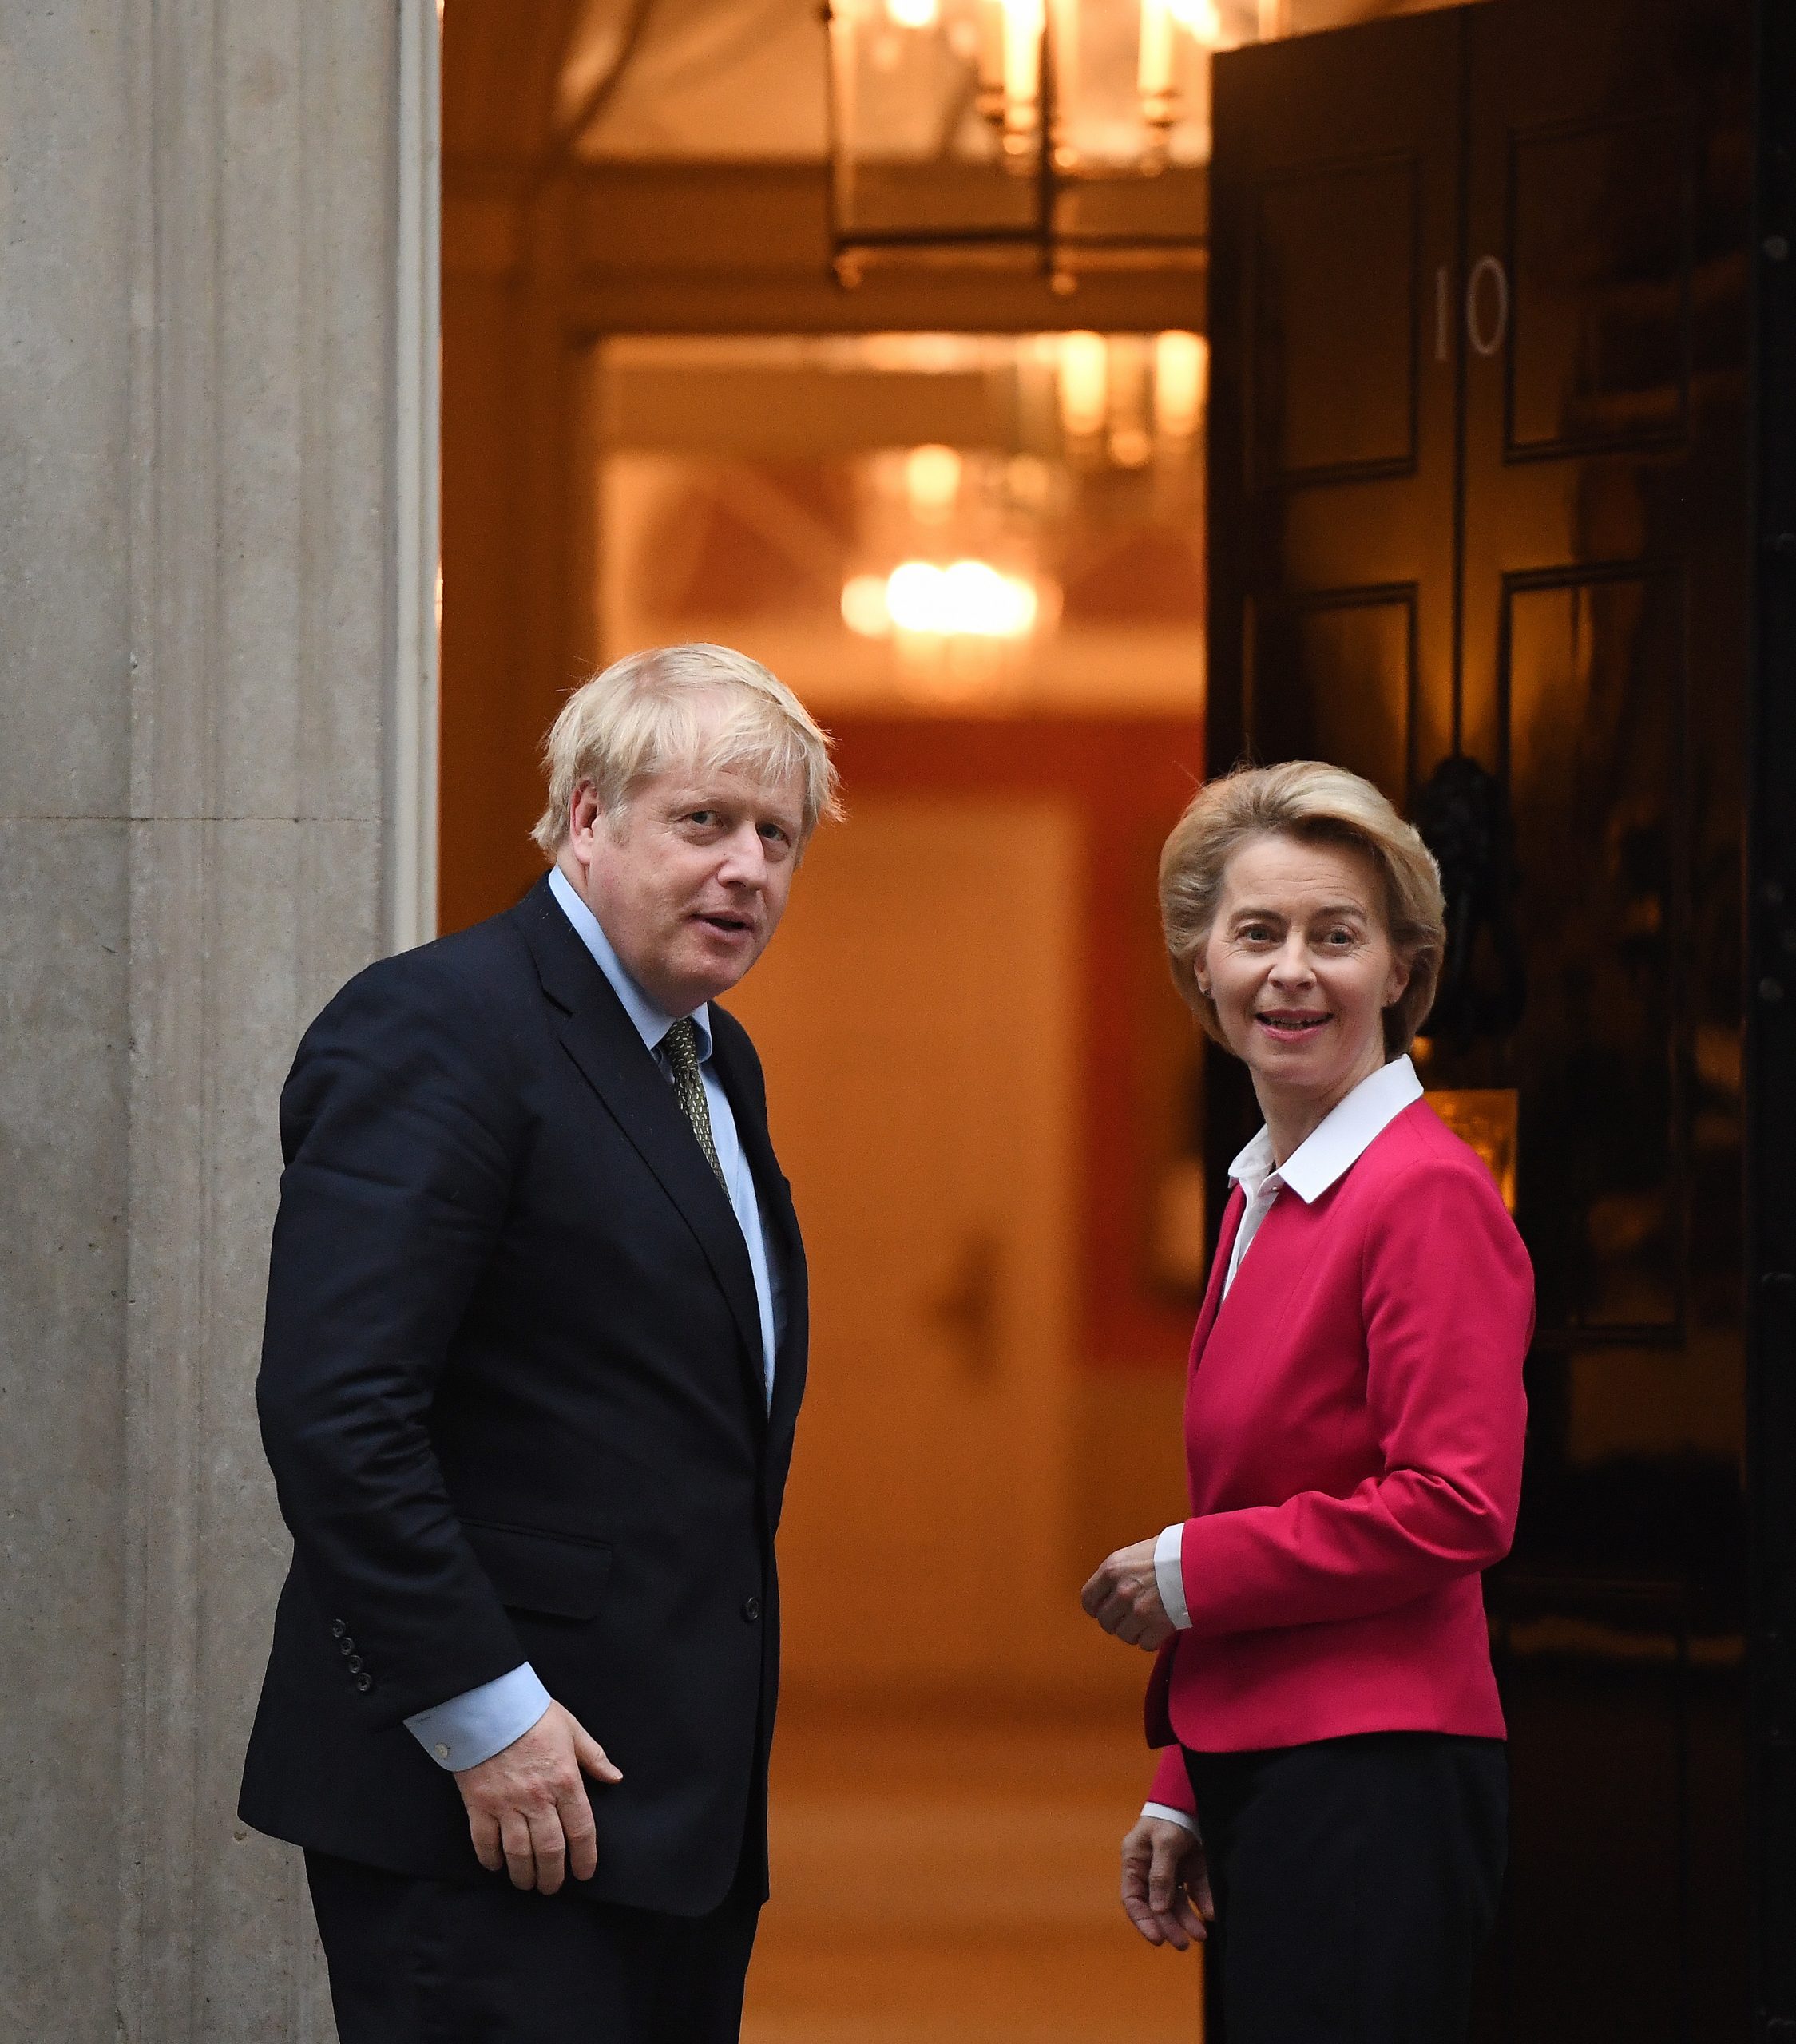 epa08863346 (FILE) - British Prime Minister Boris Johnson (L) welcomes European Commission President Ursula von der Leyen (R) to 10 Downing Street in London, Britain, 08 January 2020 (reissued 05 December 2020). Johnson and von der Leyen are expected to hold a telephone call on 05 December 2020 discuss the future relationship between the UK and the EU after Brexit. British and EU negotiators have paused Brexit talks because they say significant divergences remain and the conditions for a deal between the two sides have not been met. A negotiations phase of eleven months that started on 31 January 2020 following the UK's exit from the EU ends on 31 December 2020.  EPA/ANDY RAIN *** Local Caption *** 55751849